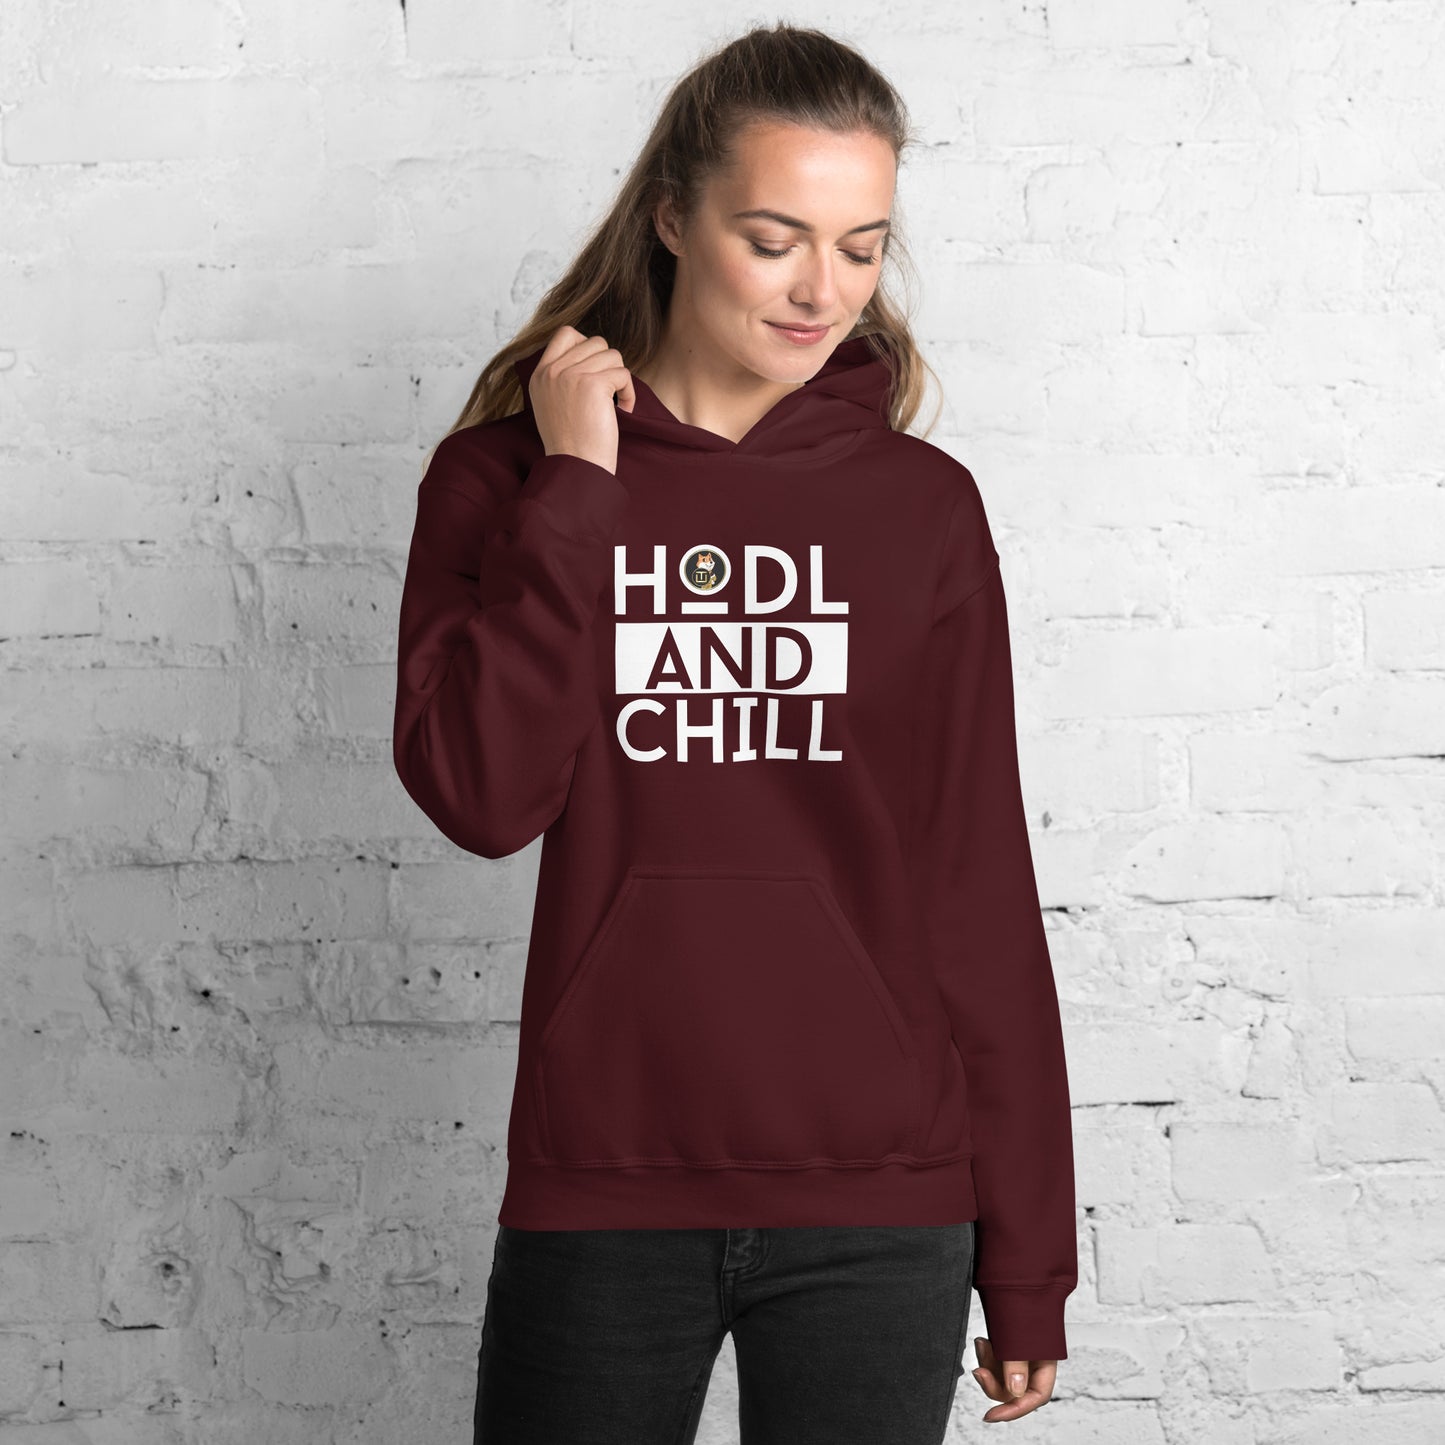 Son Of Doge 'Hodl And Chill' Women's Hoodie